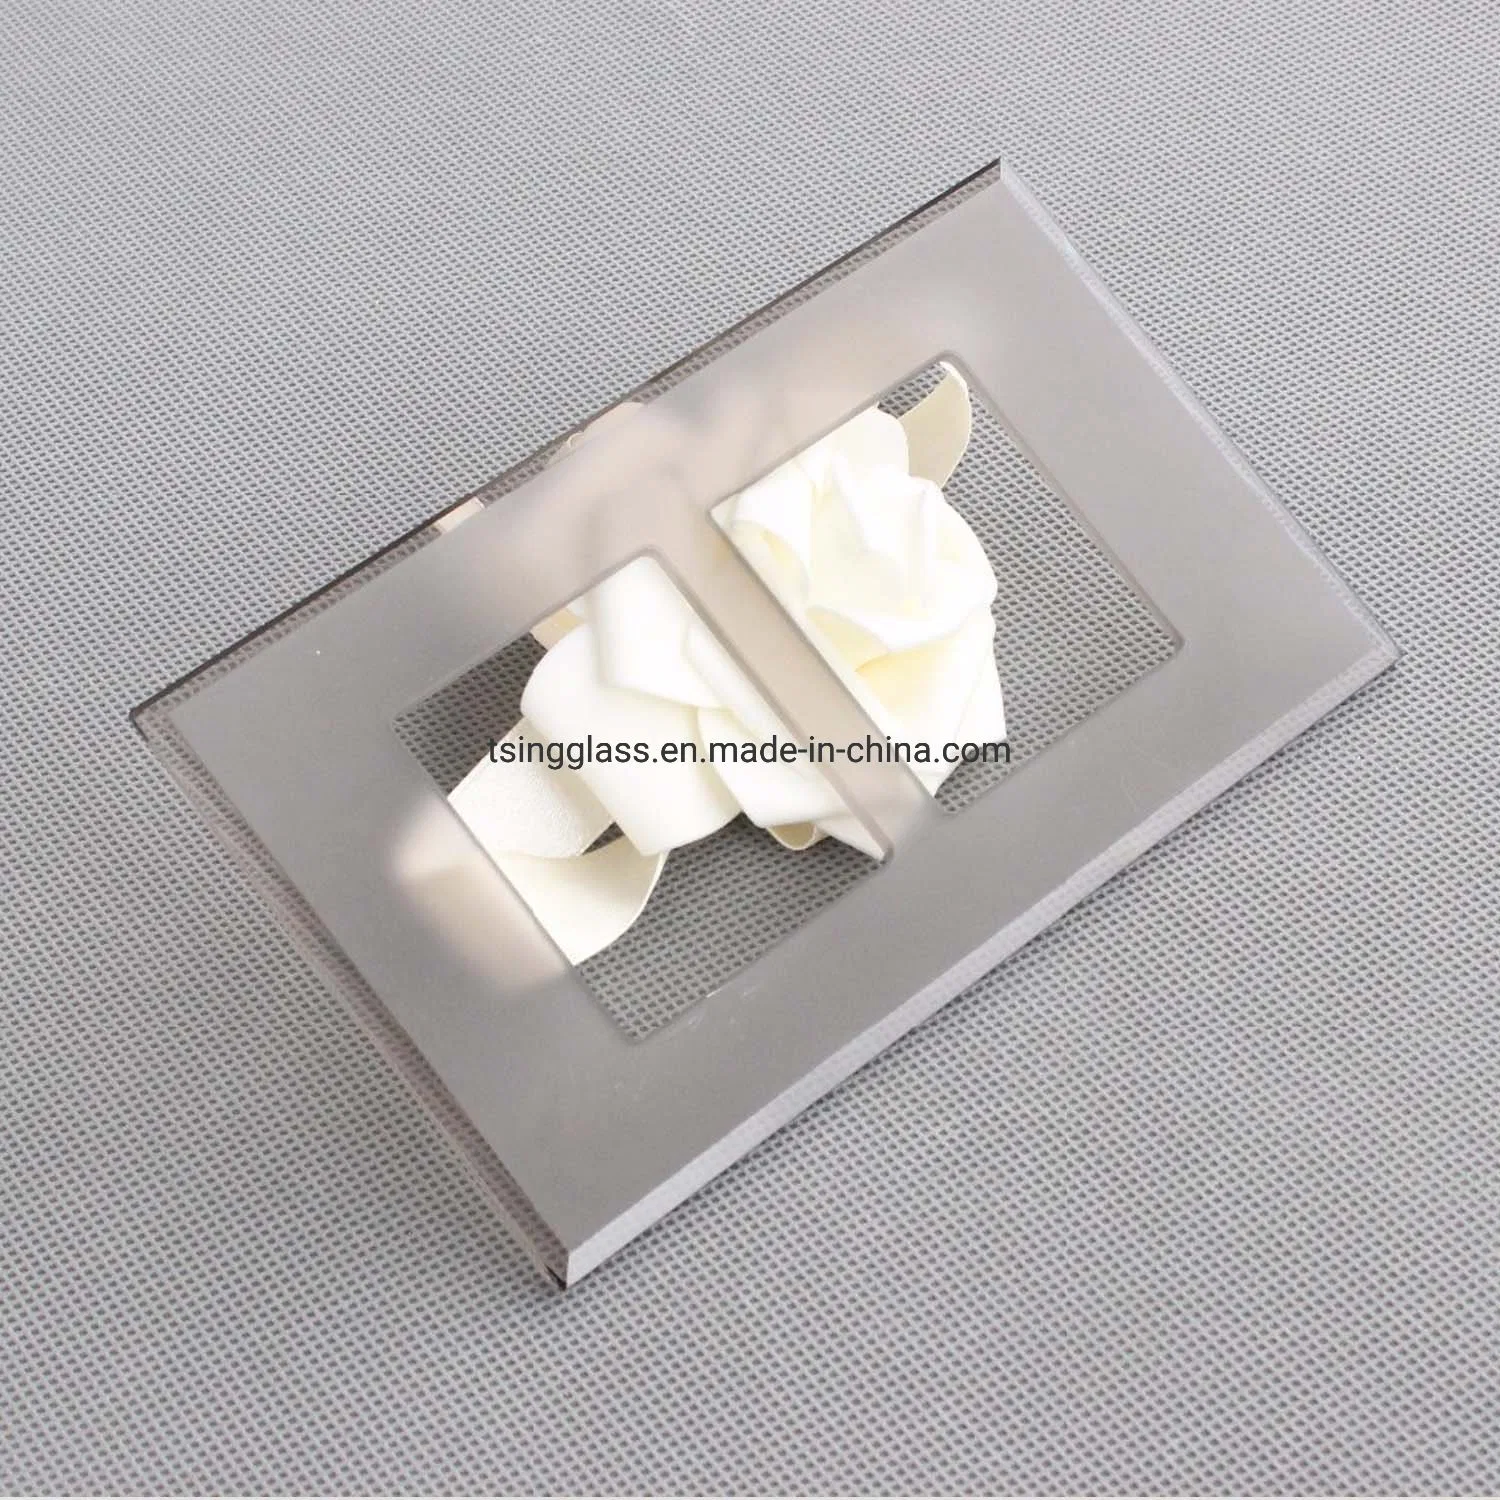 Electronic Wall Switch Glass Panel, Printing Tempered Clear Glass Light Switch Glass Plates, Electrical Touch Switches Glass